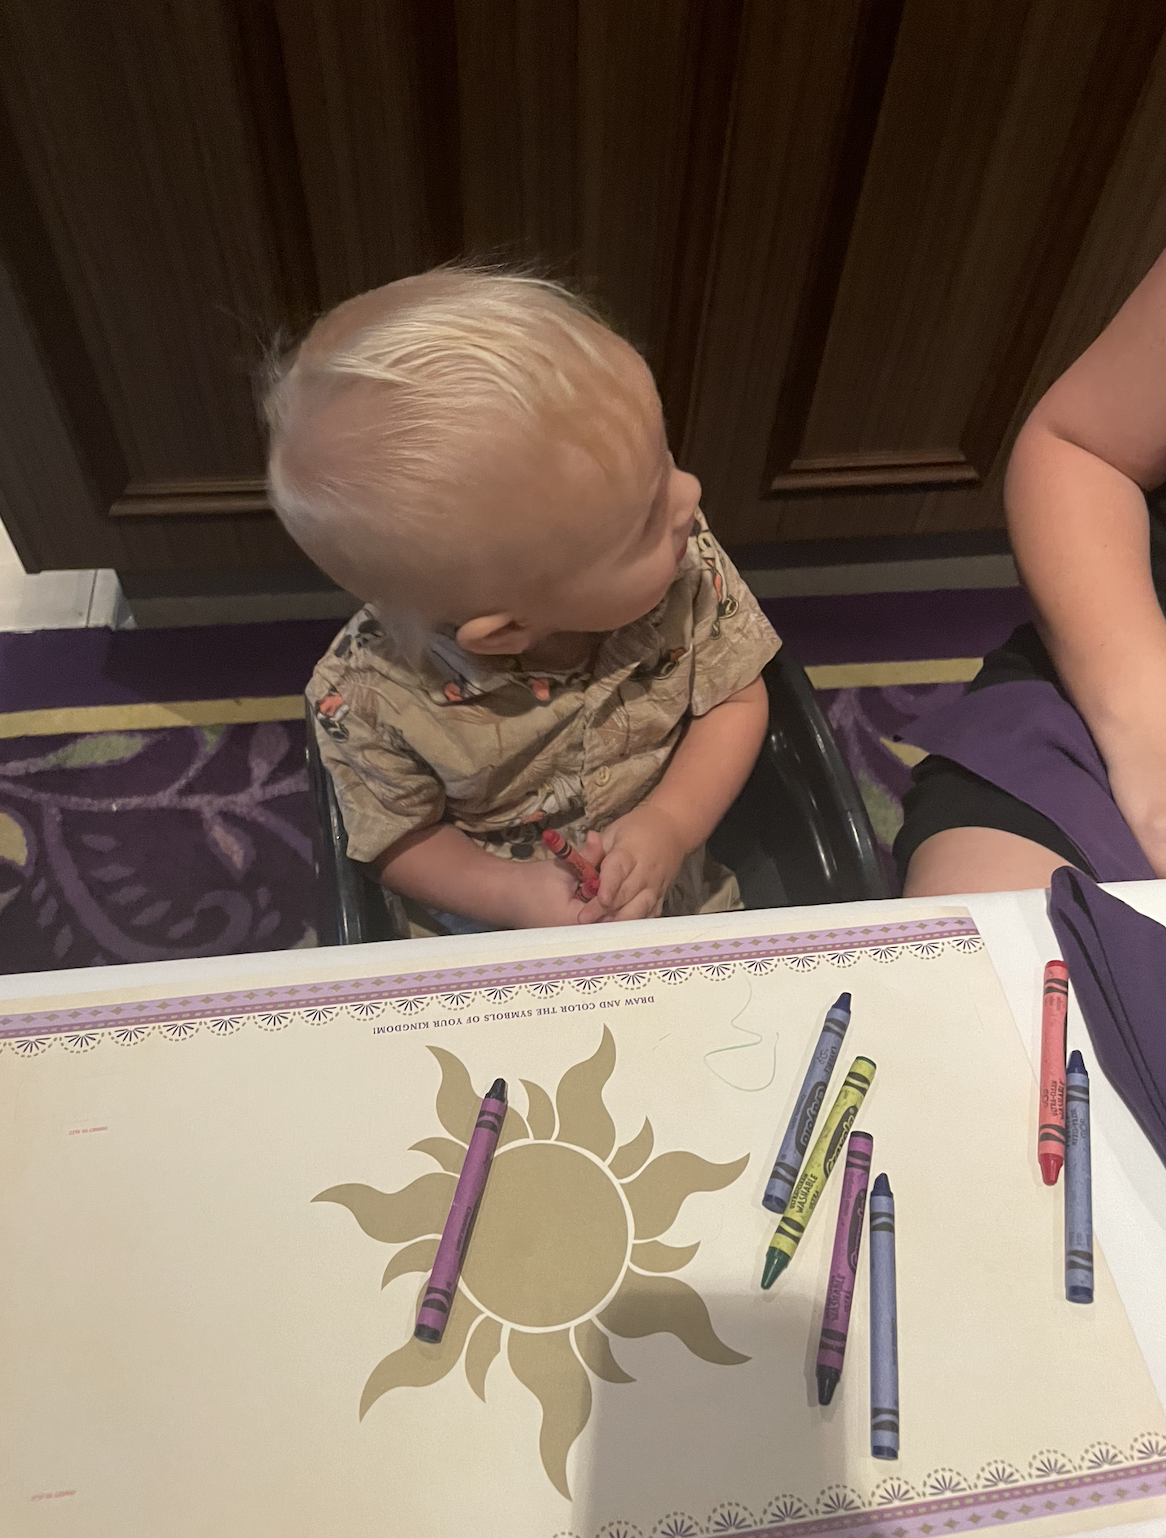 A toddler with light hair sits at a table with crayons and a sun-themed mat, looking to the side. An adult&#x27;s arm is partially visible next to the child